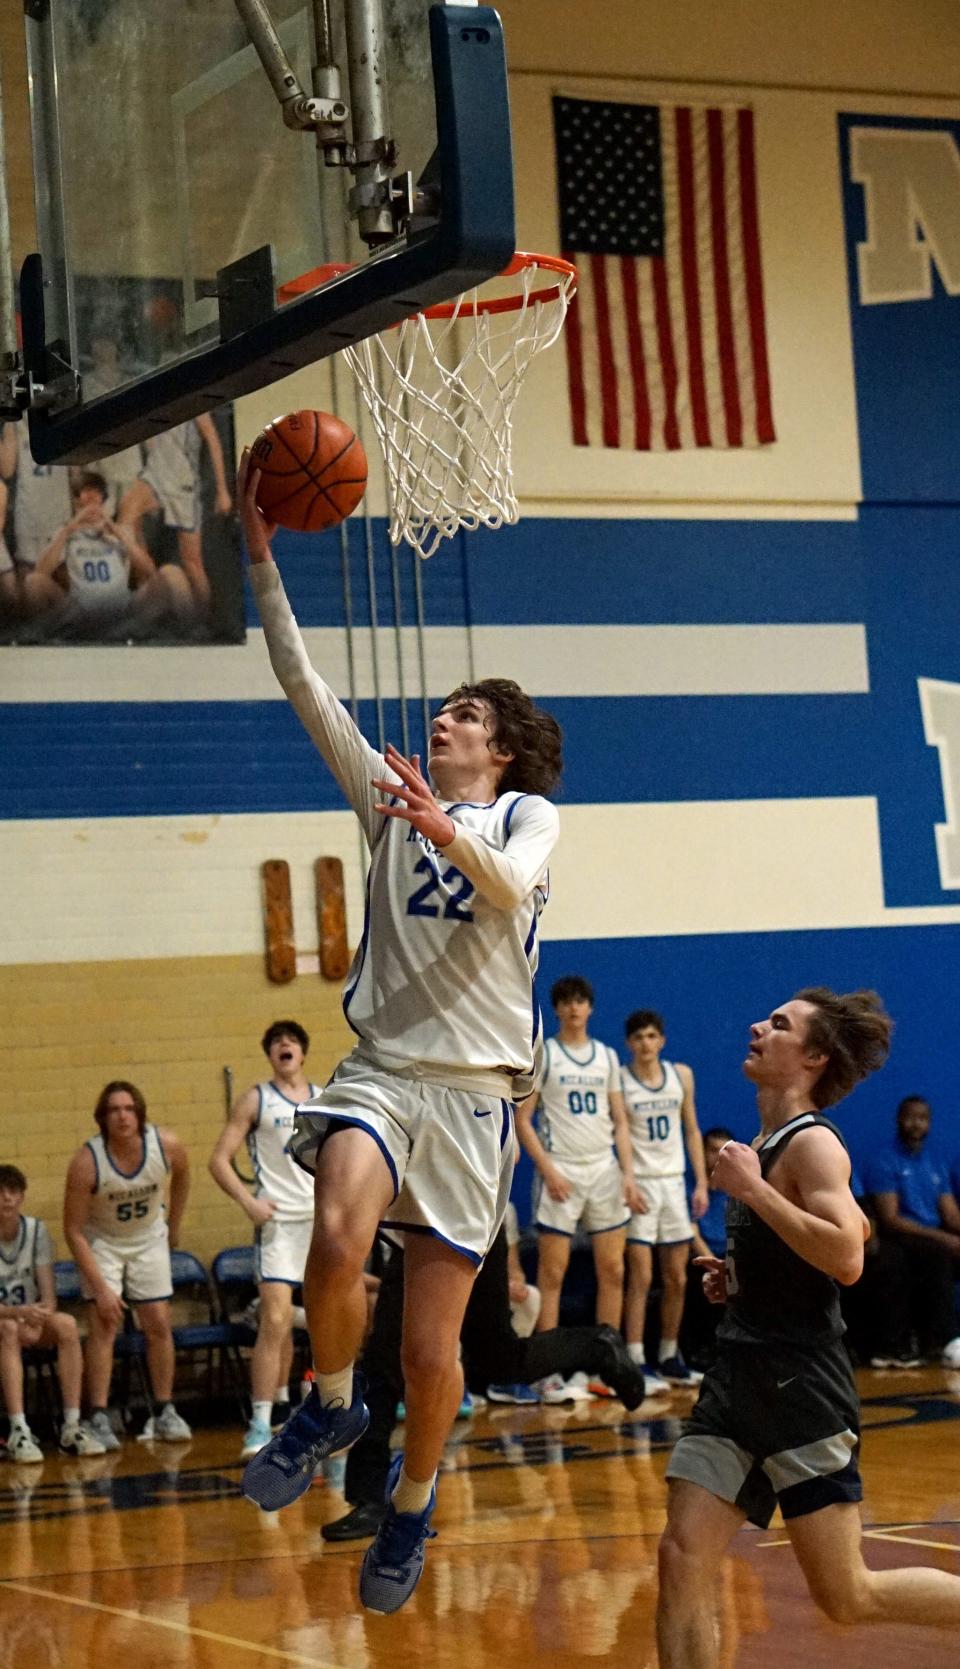 McCallum's George McCoy drives in for a layup against LASA during their Jan. 23 matchup. The Knights won this year's District 24-5A championship by going undefeated in district play. The state playoffs begin next week.